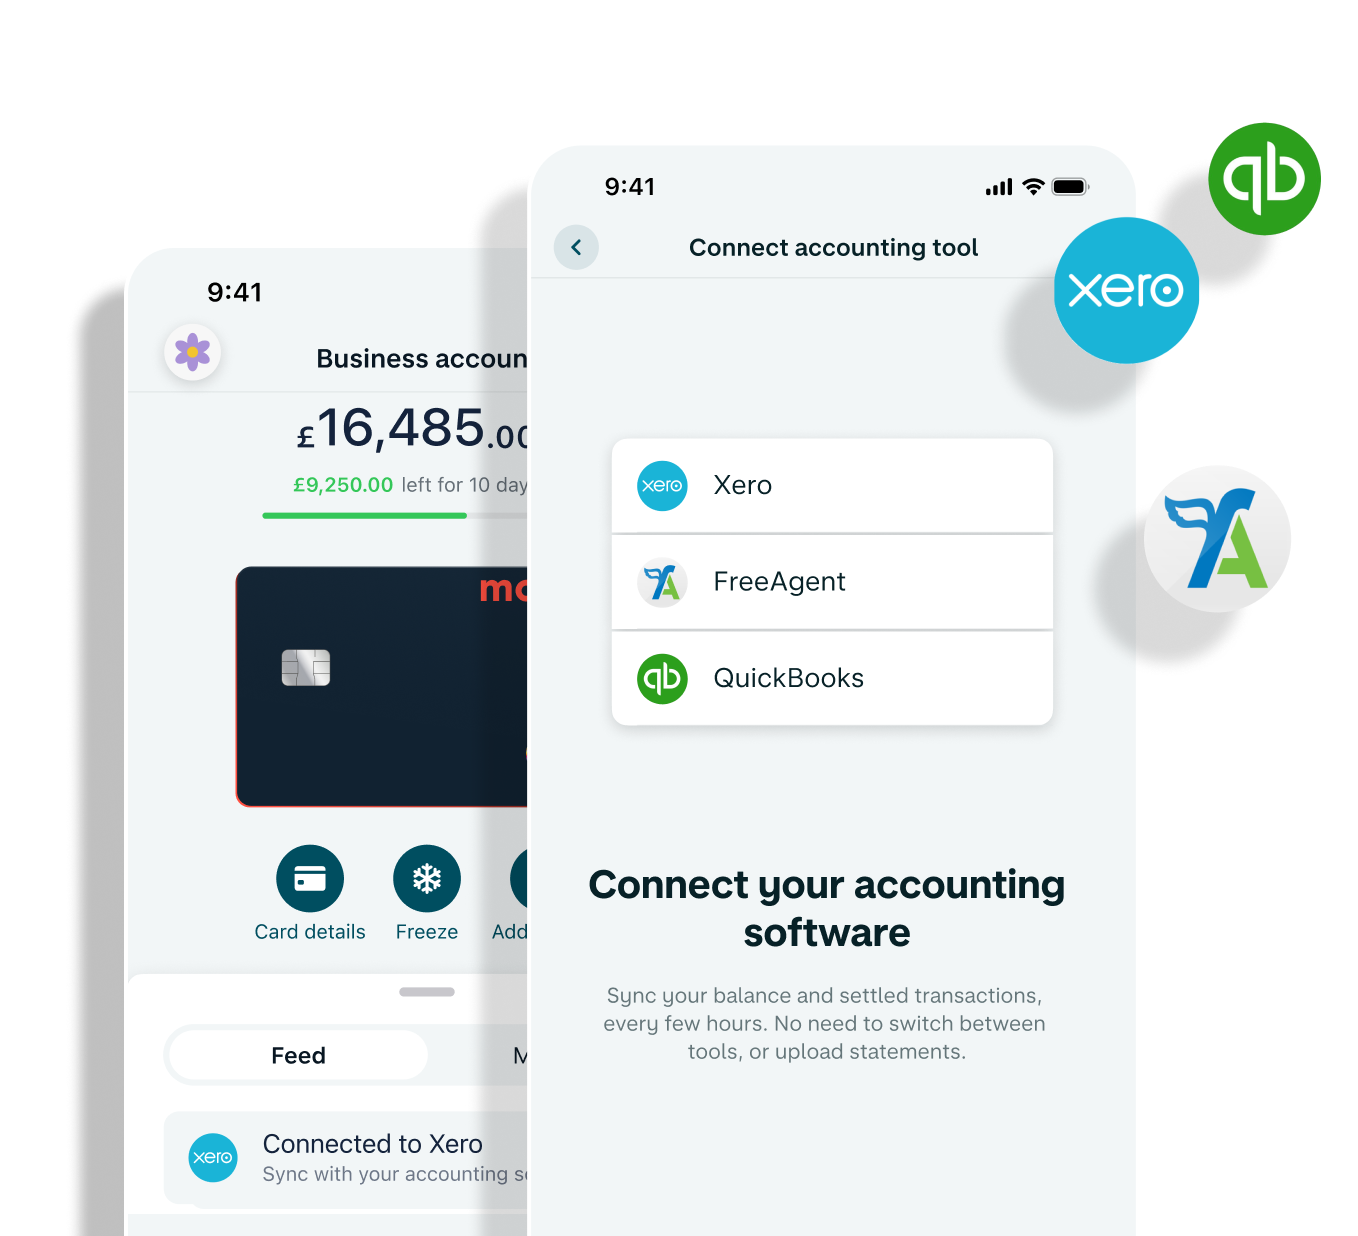 A device showing a business account in the Monzo app and connection options for Xero QuickBooks and FreeAgent